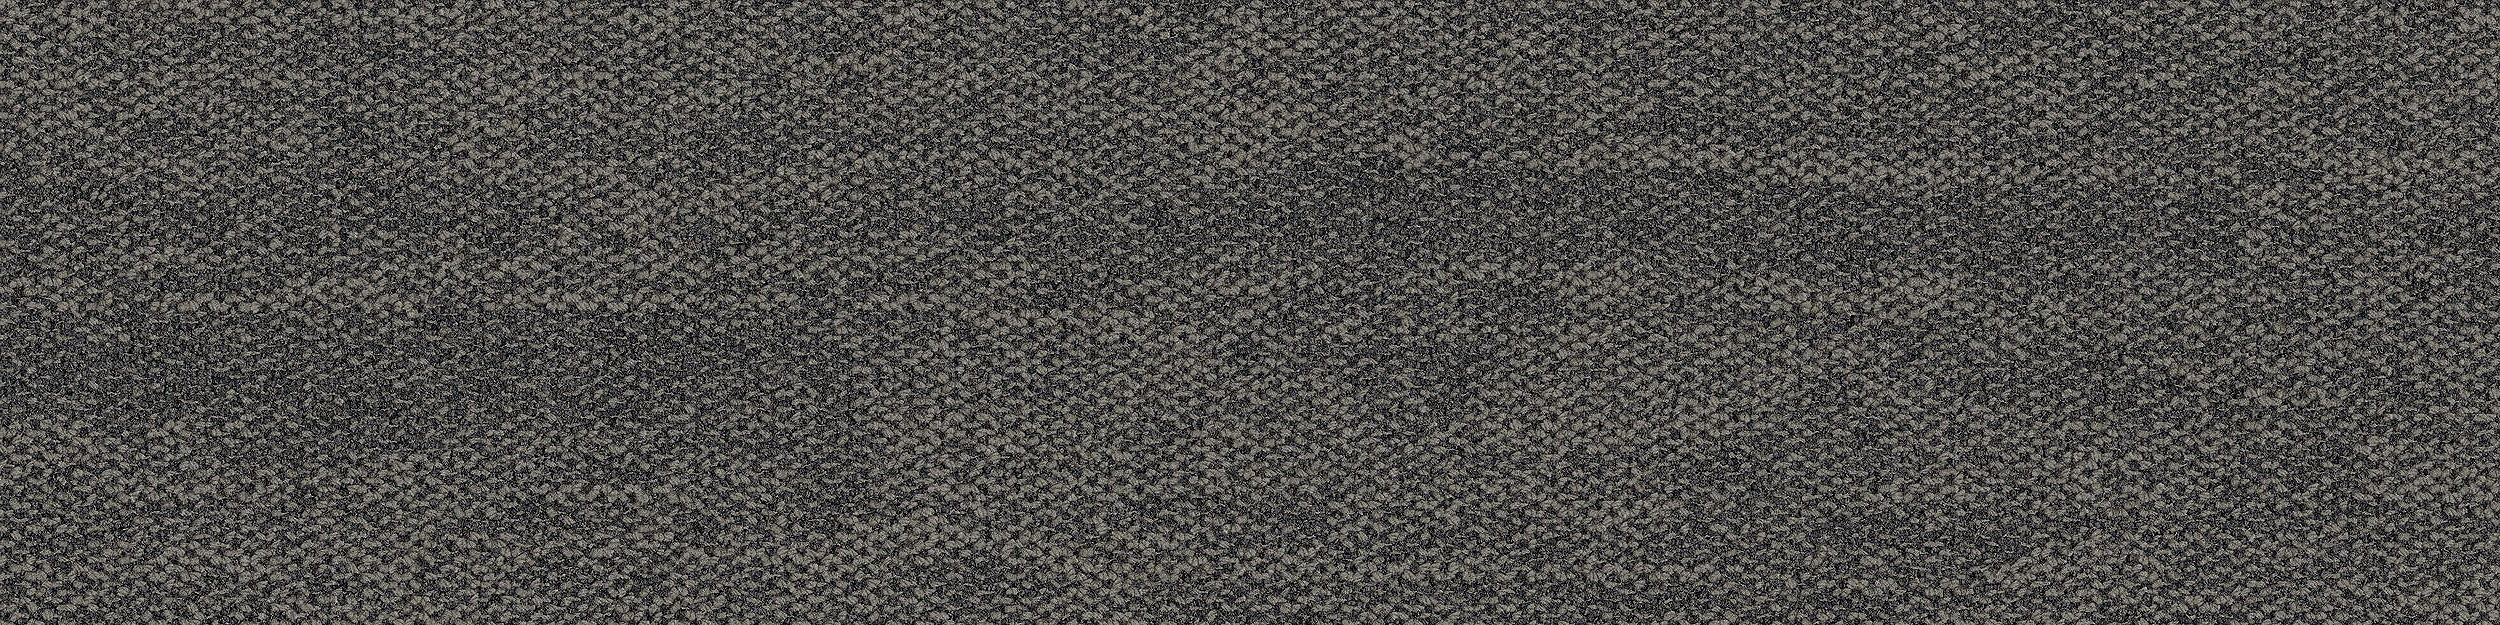 Open Air 402 Carpet Tile In Charcoal image number 6